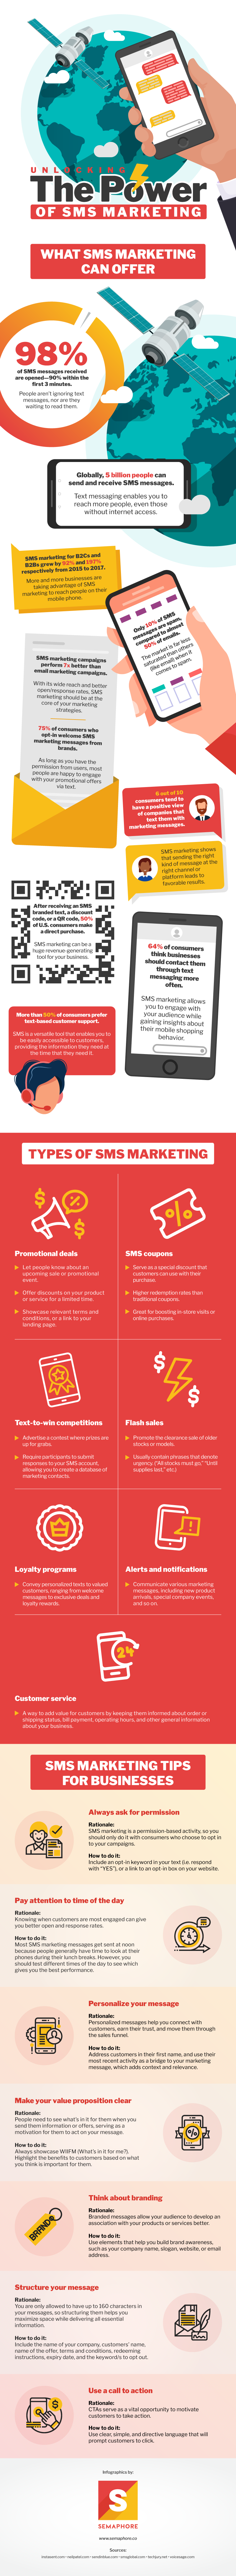 Unlocking the Power of SMS Marketing (Infographic)